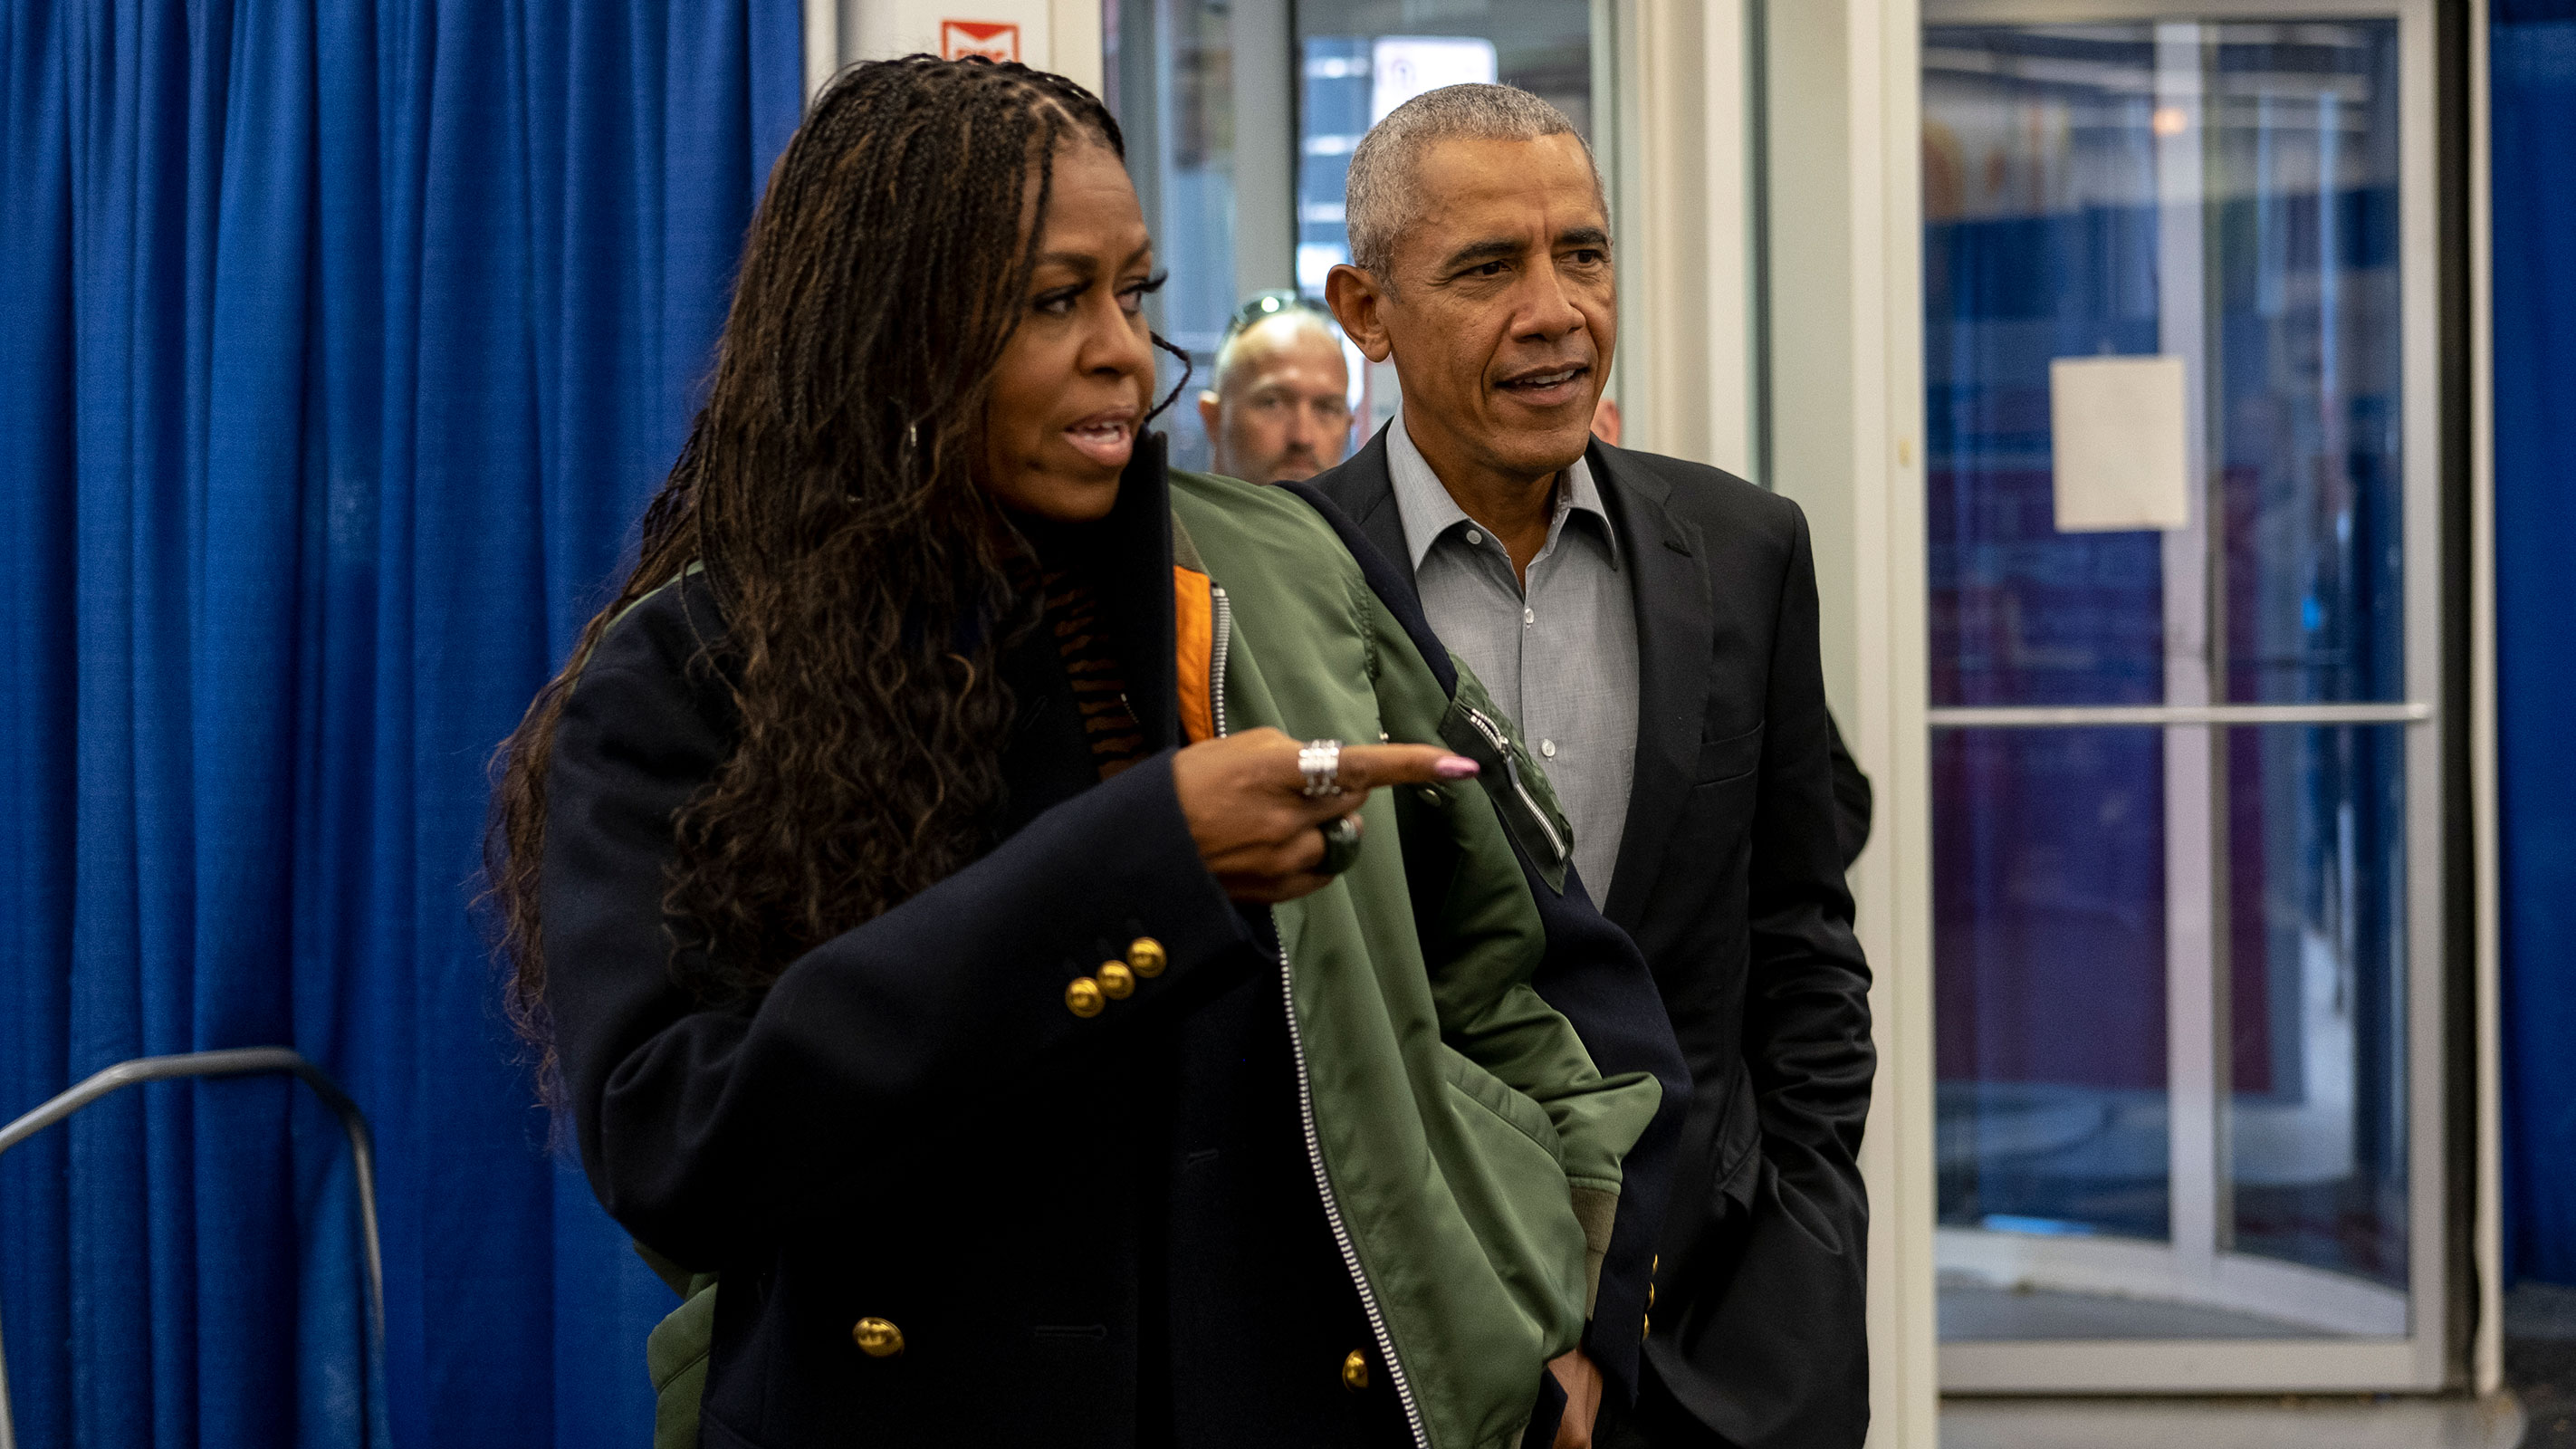 In this October 2022 photo, former first lady Michelle Obama and former President Barack Obama arrive to cast their vote at an early voting venue in Chicago.